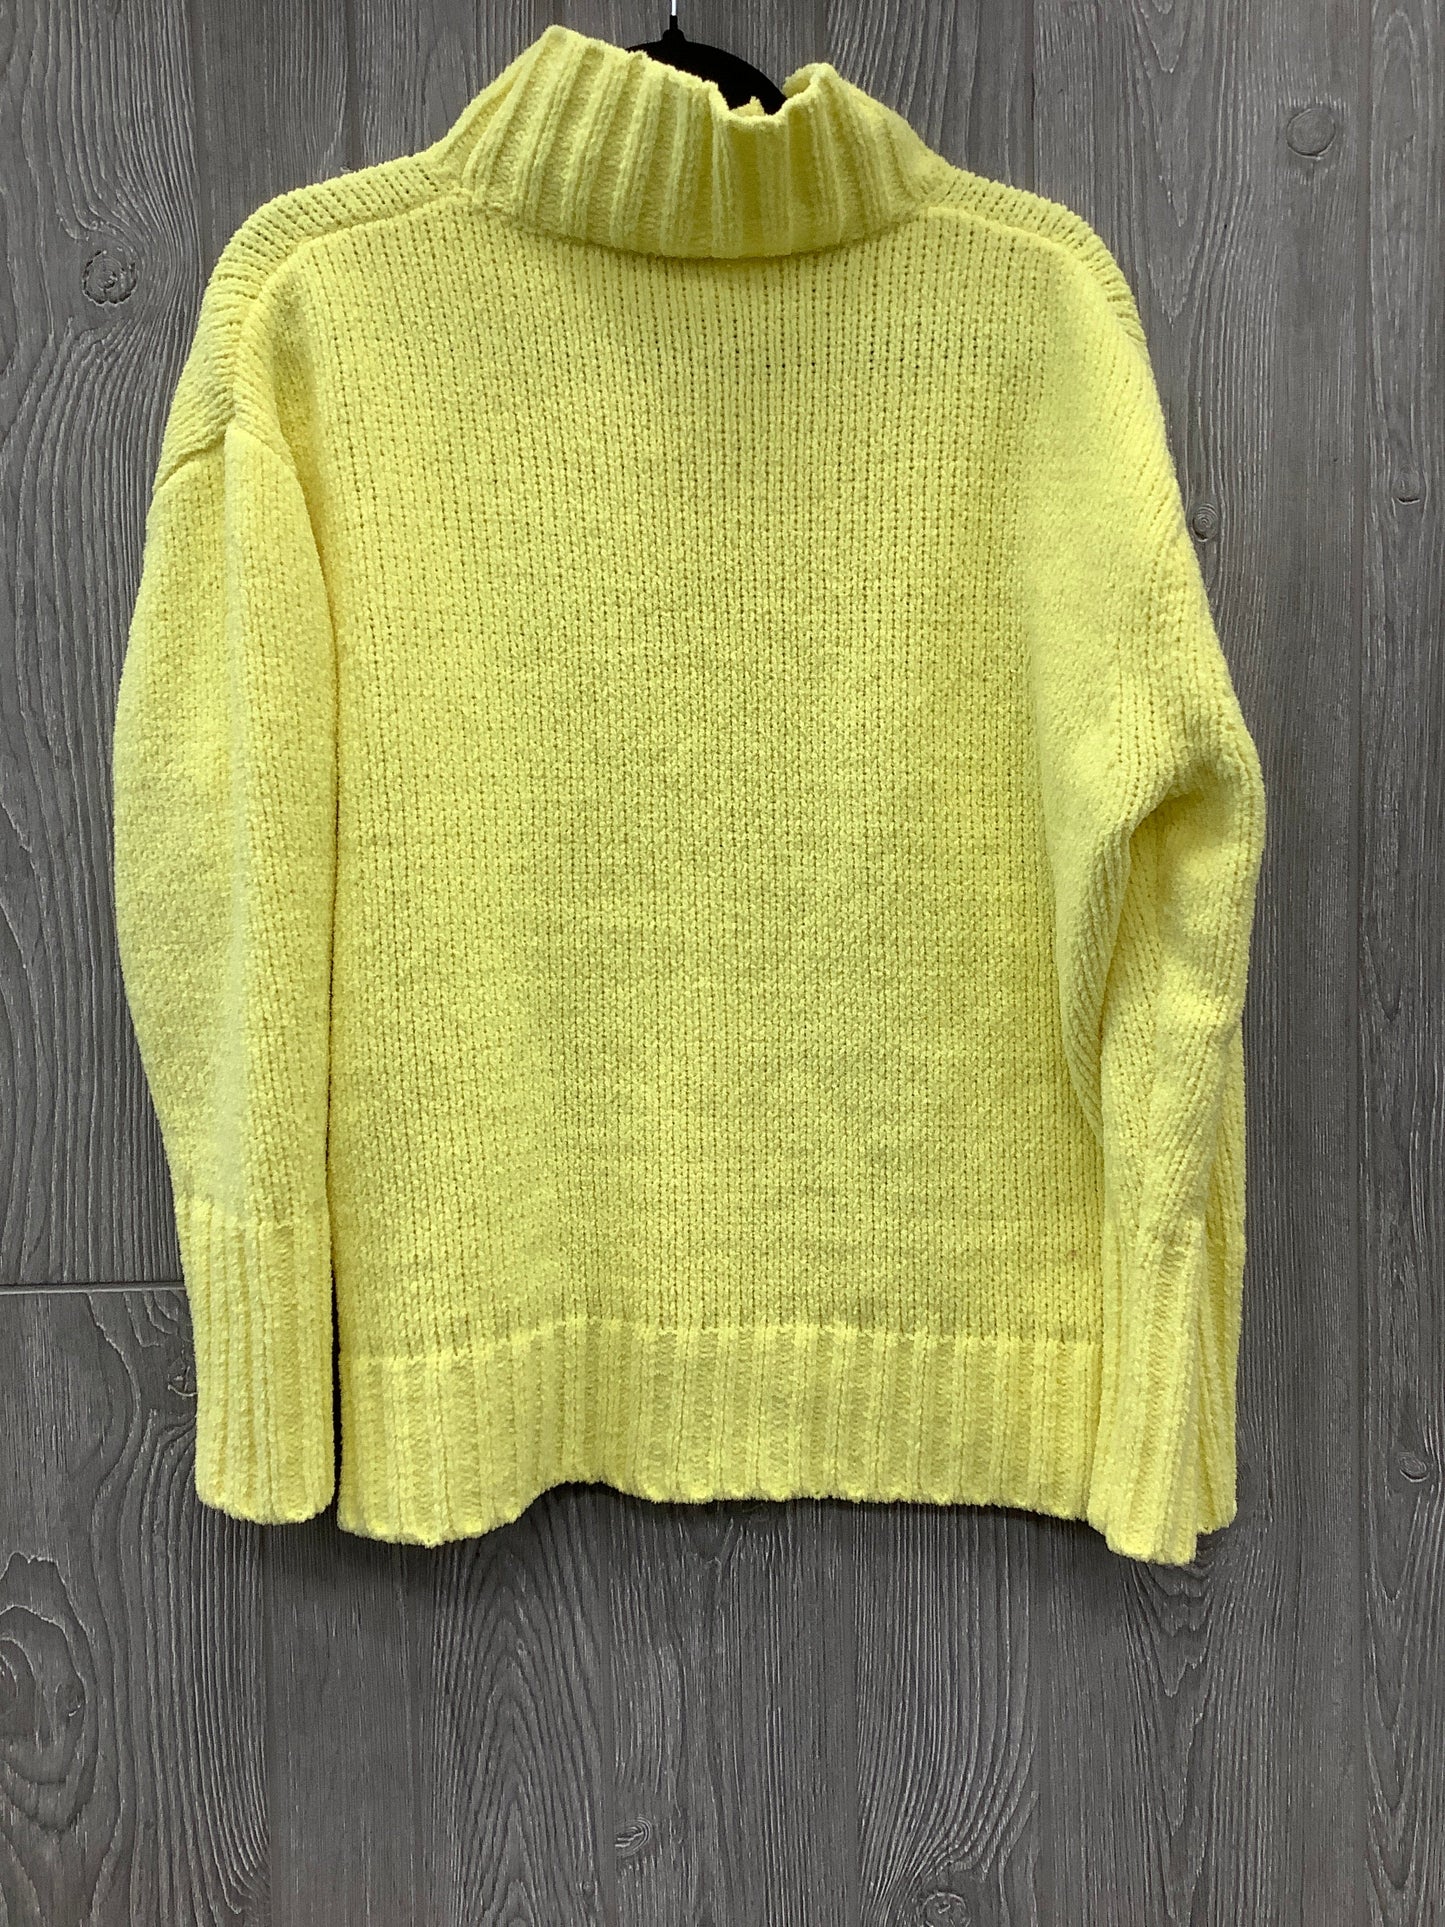 Yellow Sweater Philosophy, Size L